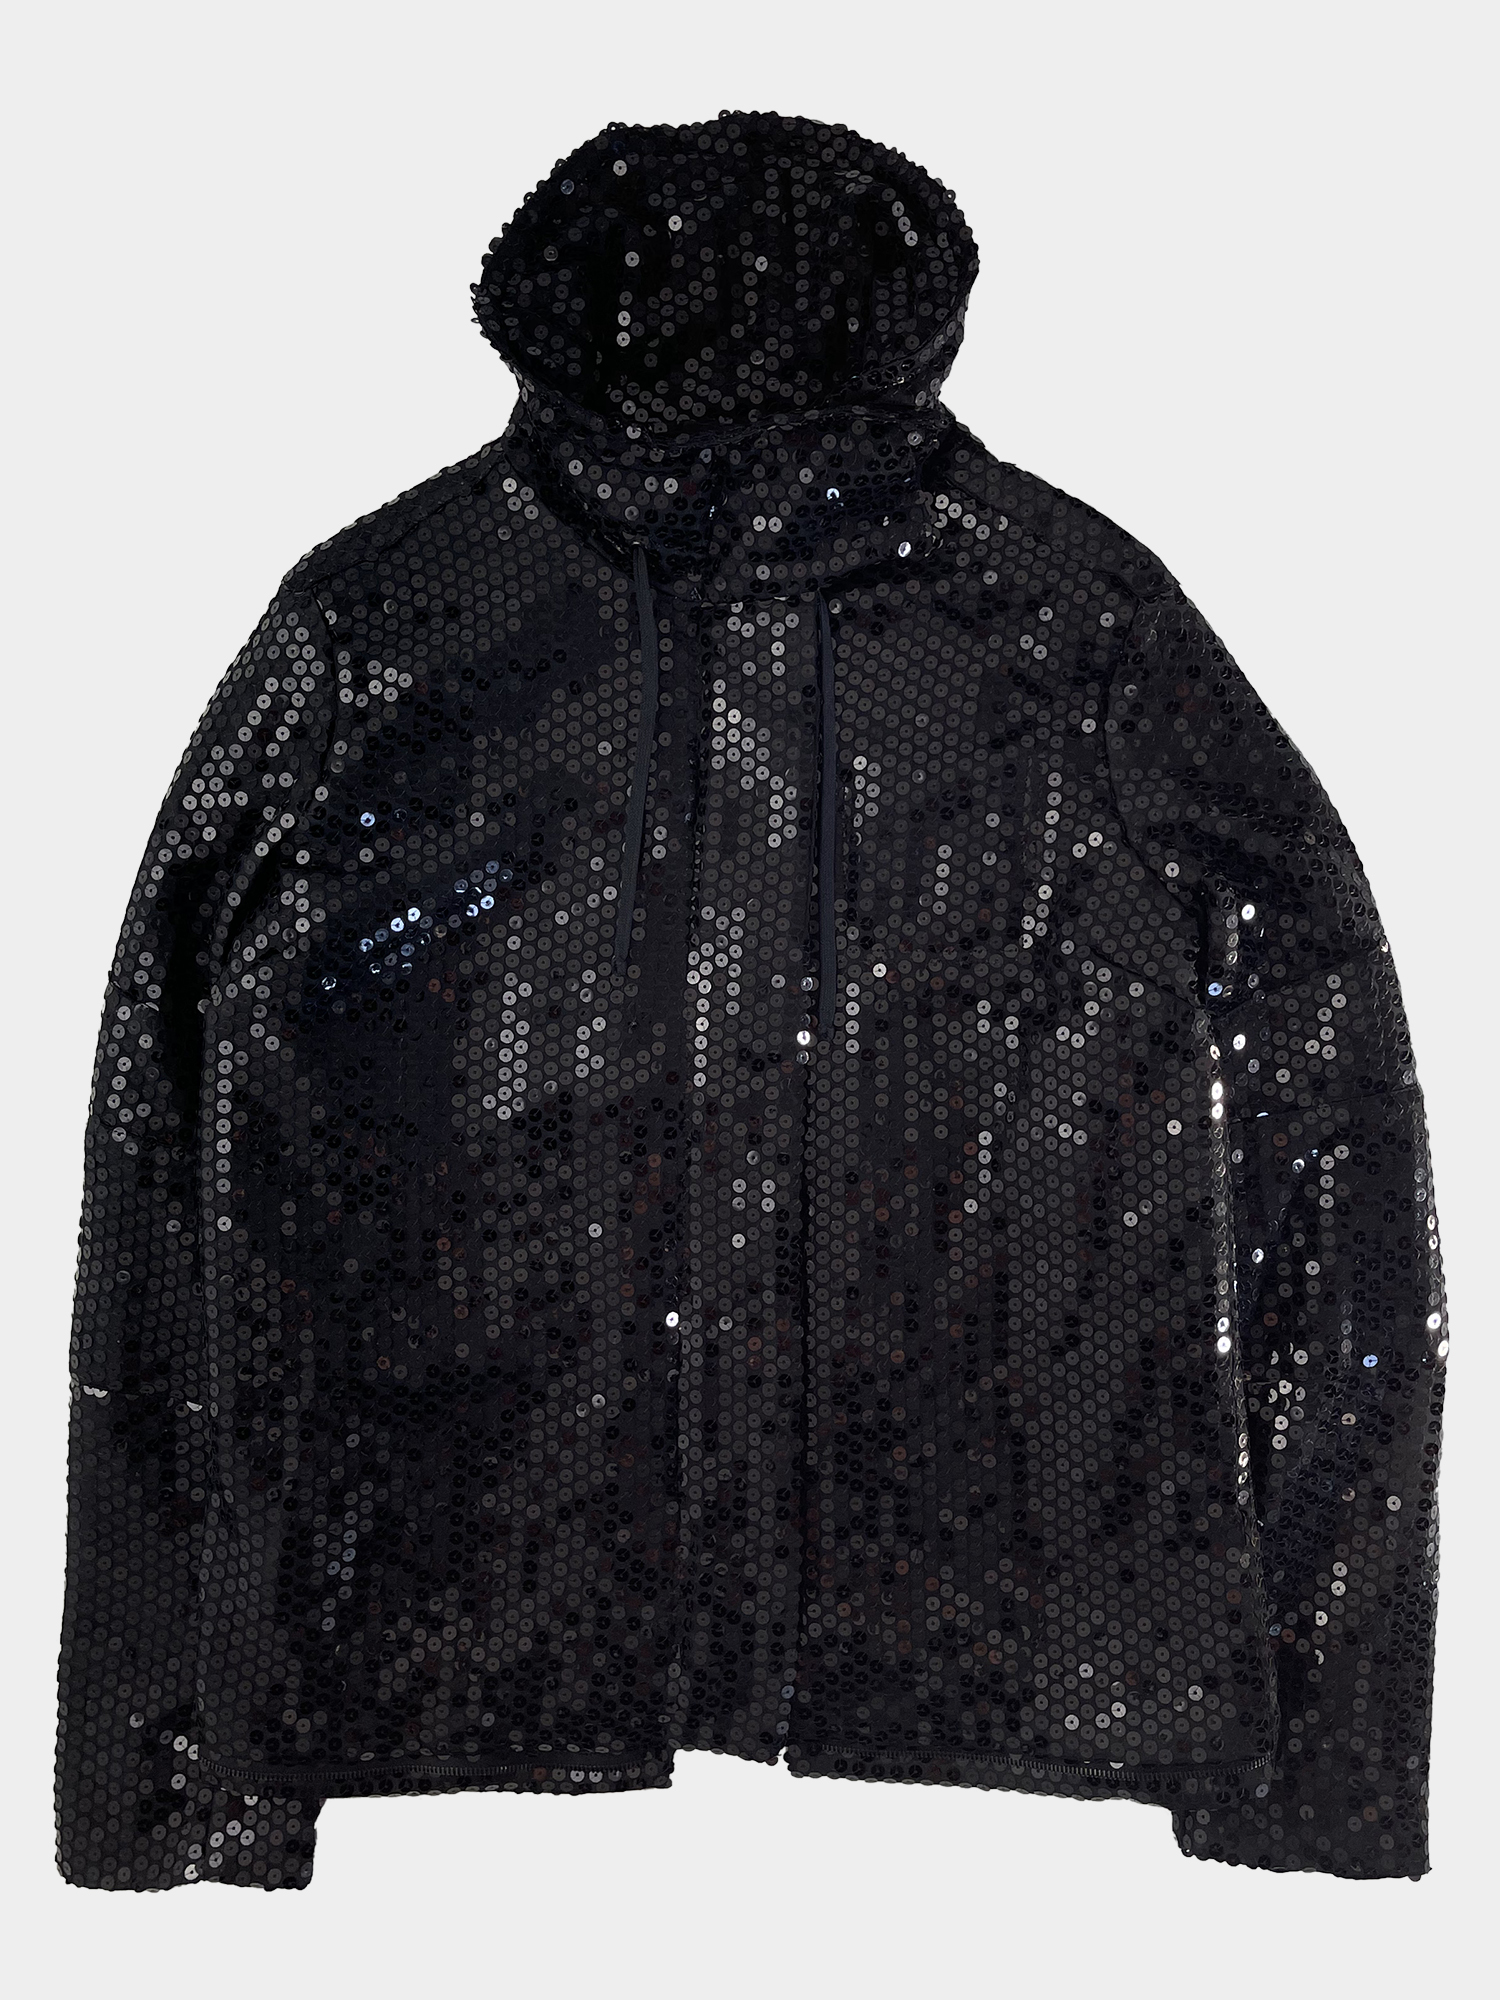 Helmut Lang AW2000 Sequin Astro Jacket — ARCHIVED